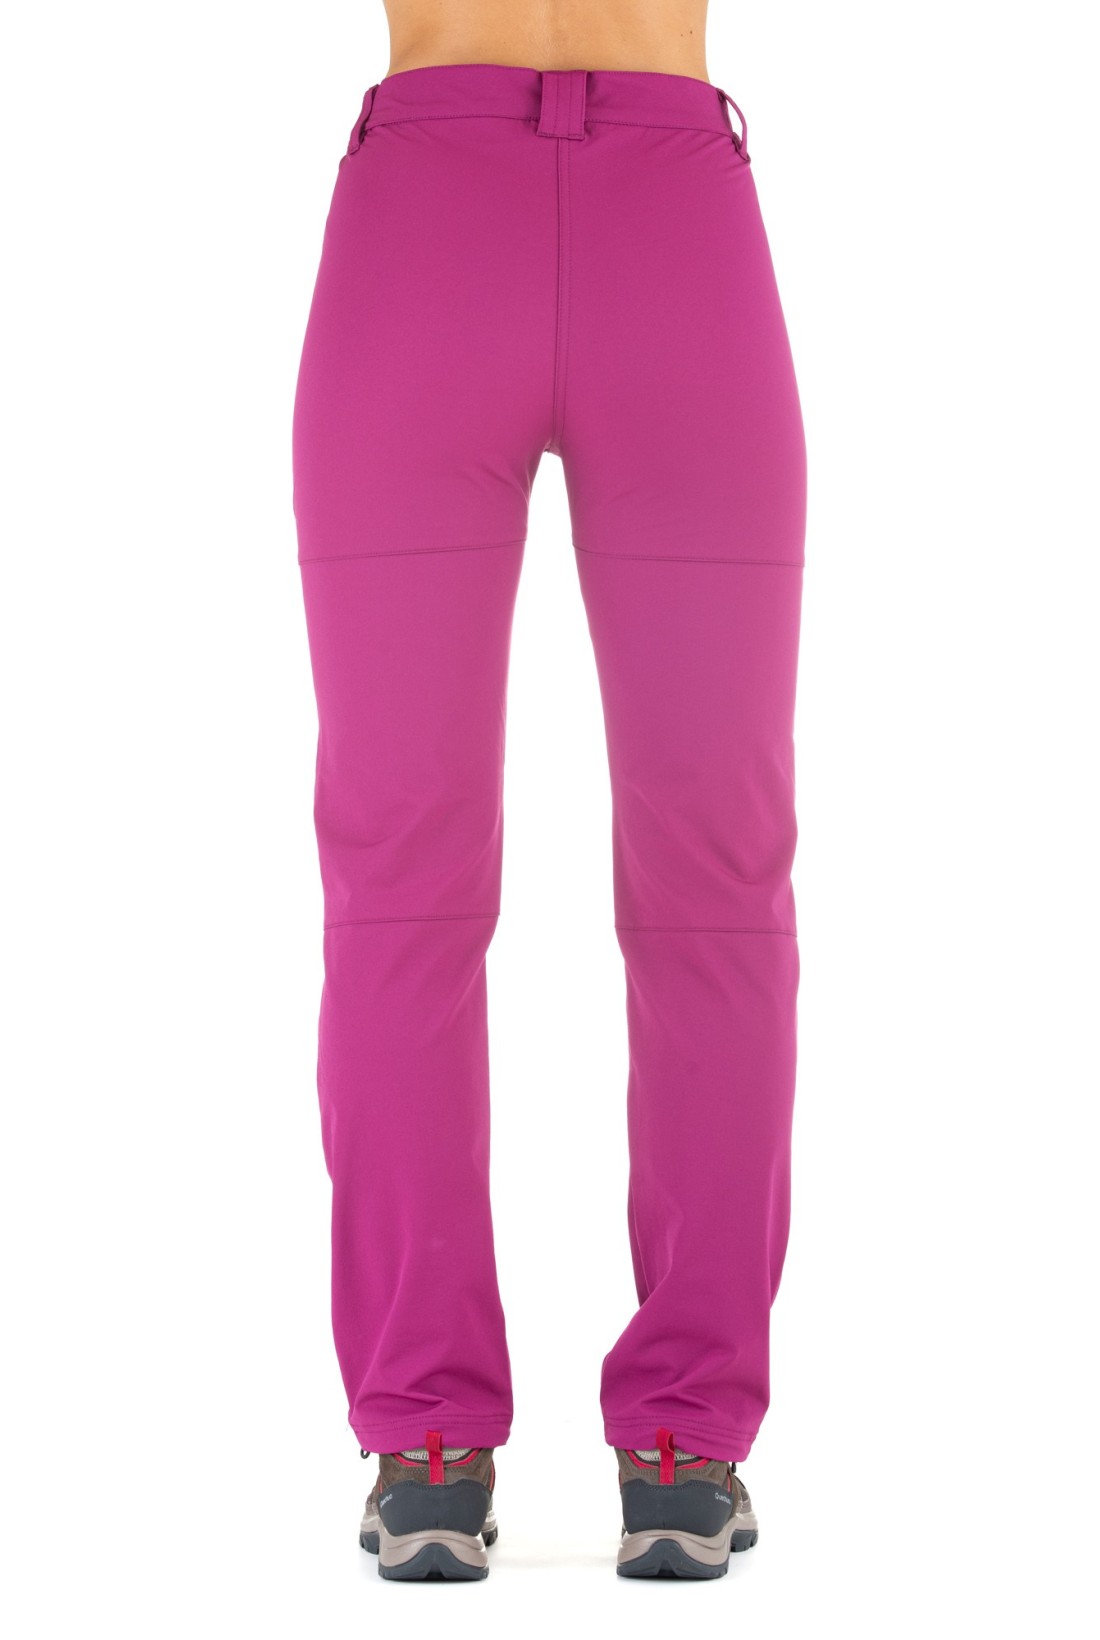 Women's Outdoor Pants & Capris | The North Face Canada